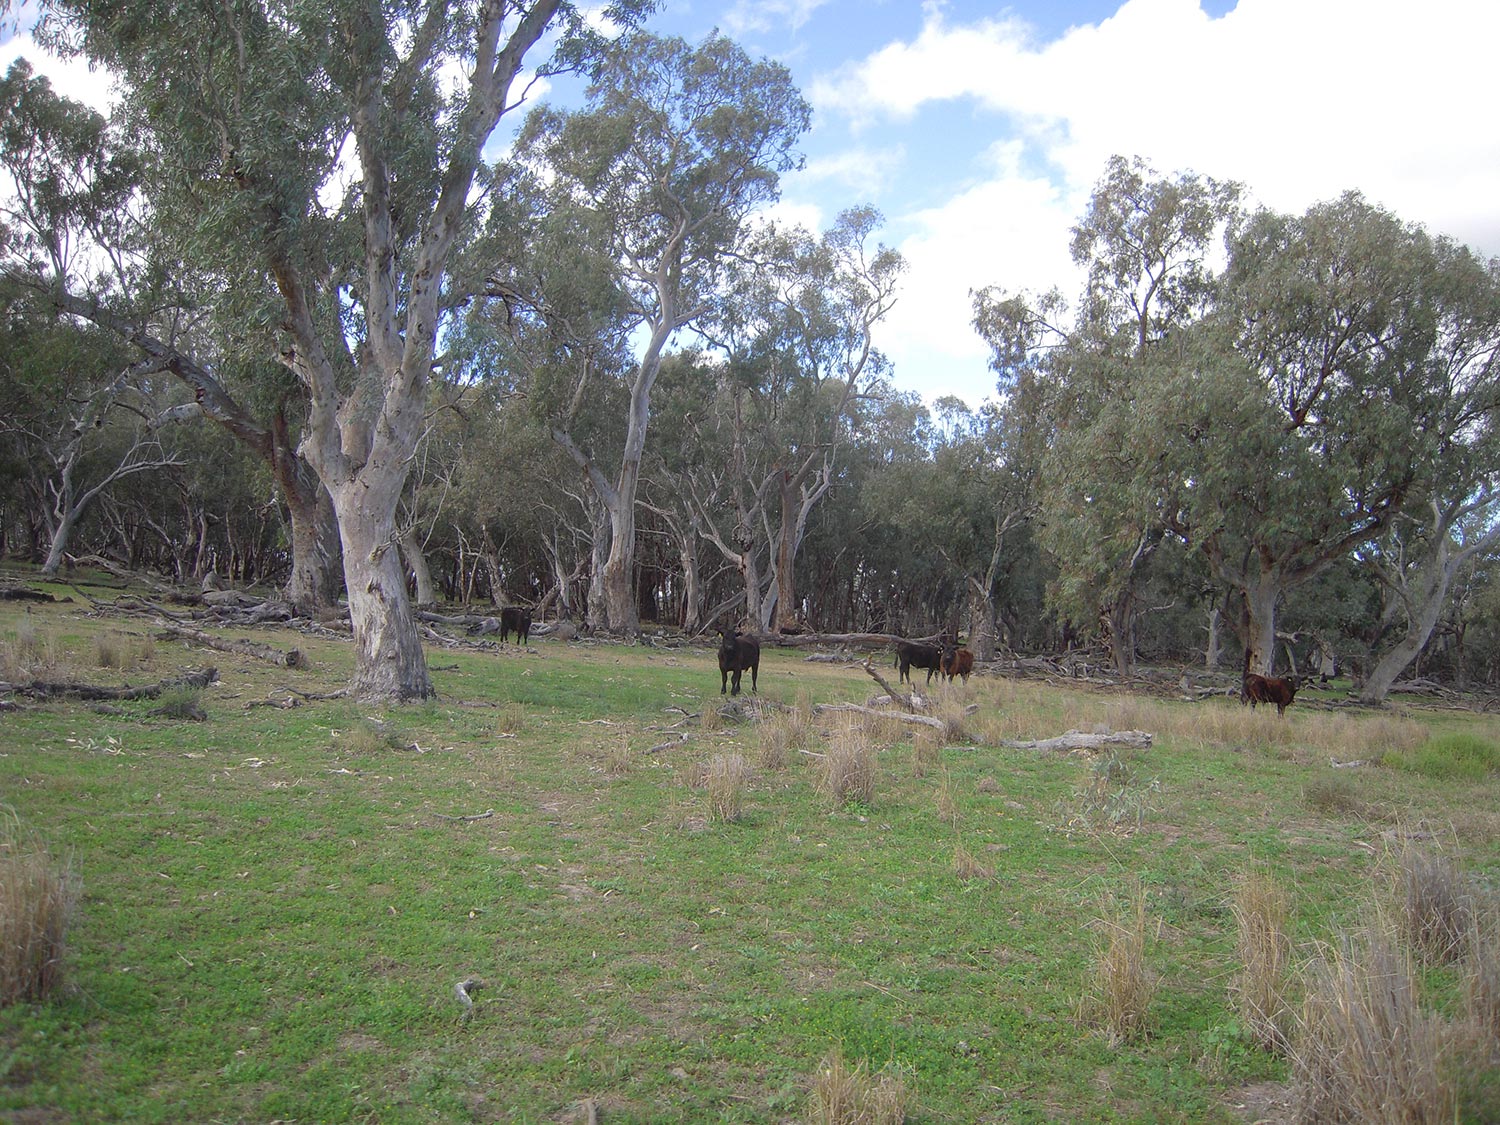 Oxley Cattle amongst the gums